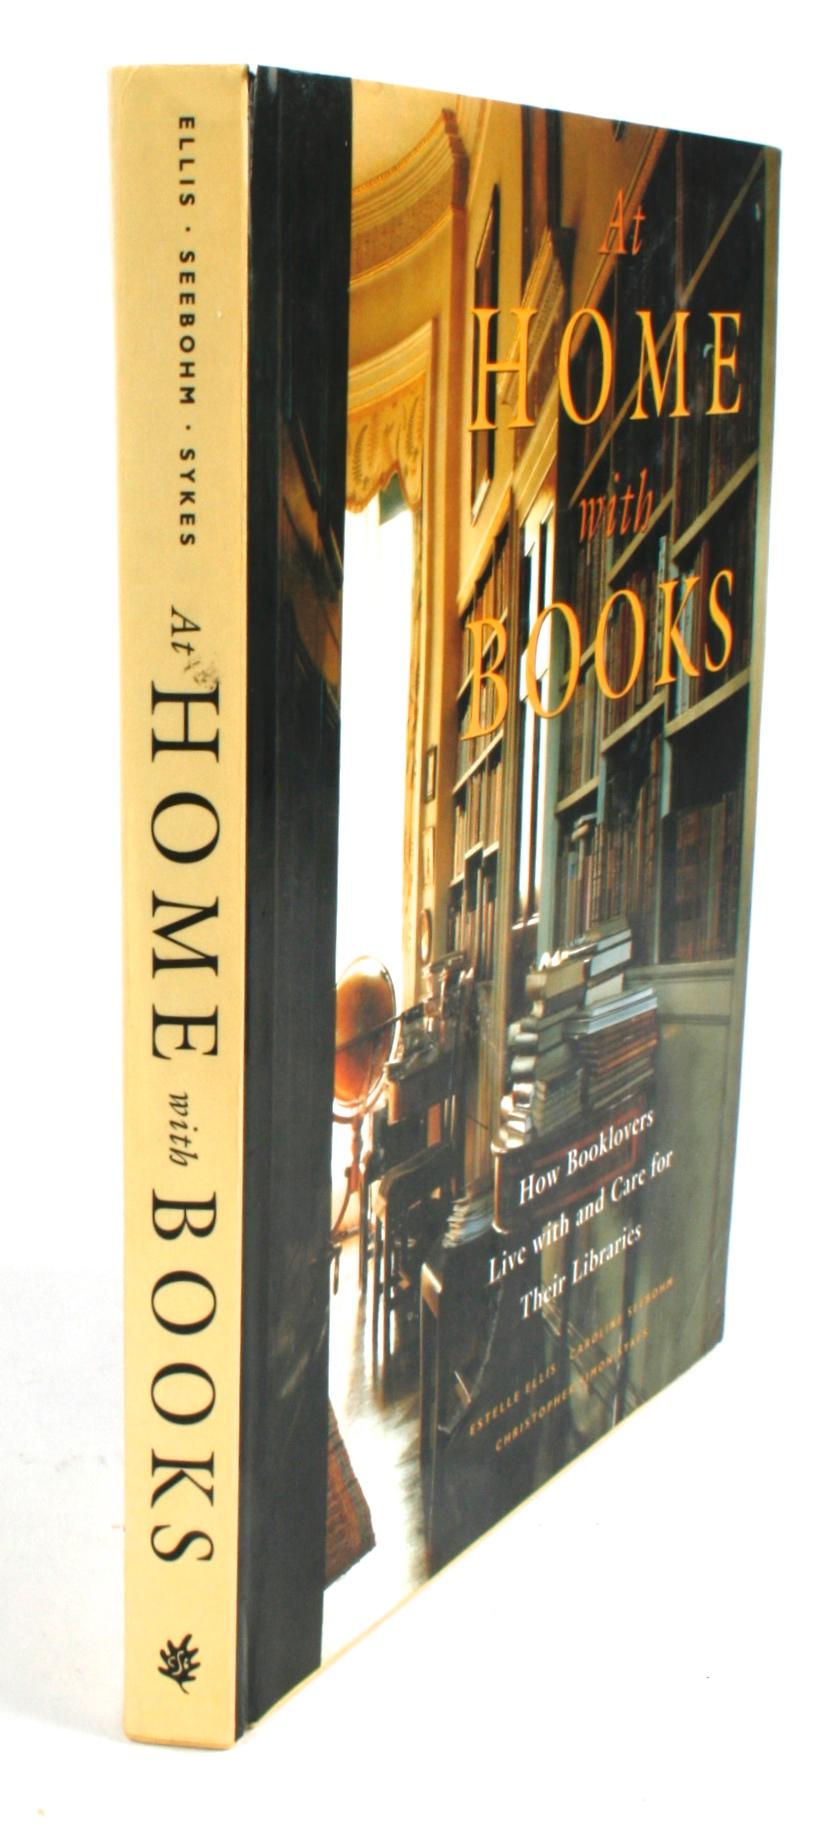 At Home with Books, How Booklovers Live with and Care for Their Libraries. New York: Carol Southern Books, 1995. Stated first edition hardcover with dust jacket. 248 pp. The book is about forty book lovers, their book passions, libraries and their